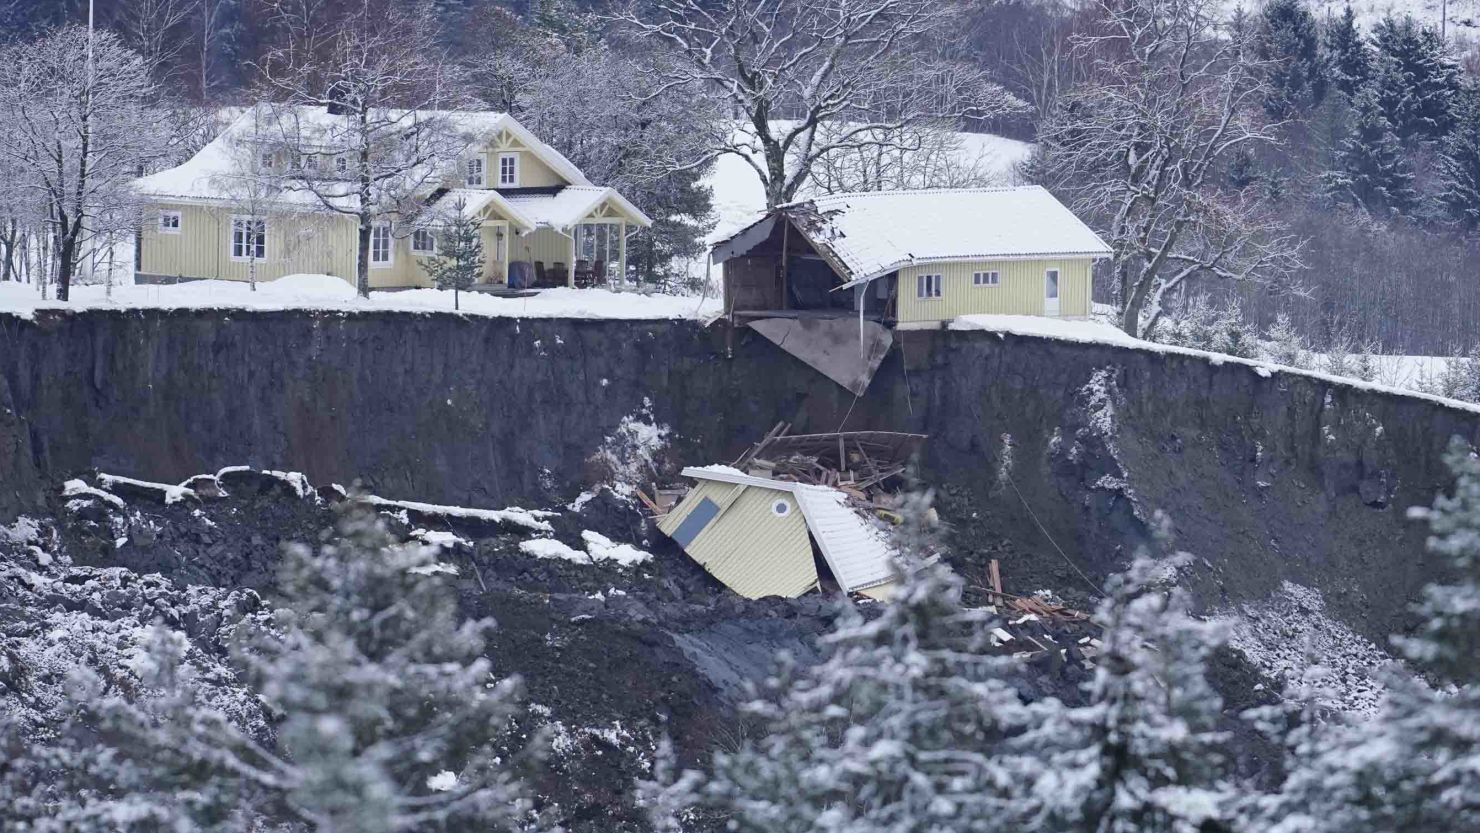 Debris from a destroyed house is seen in Ask, Gjerdrum county, on December 31, 2020, one day after a landslide.